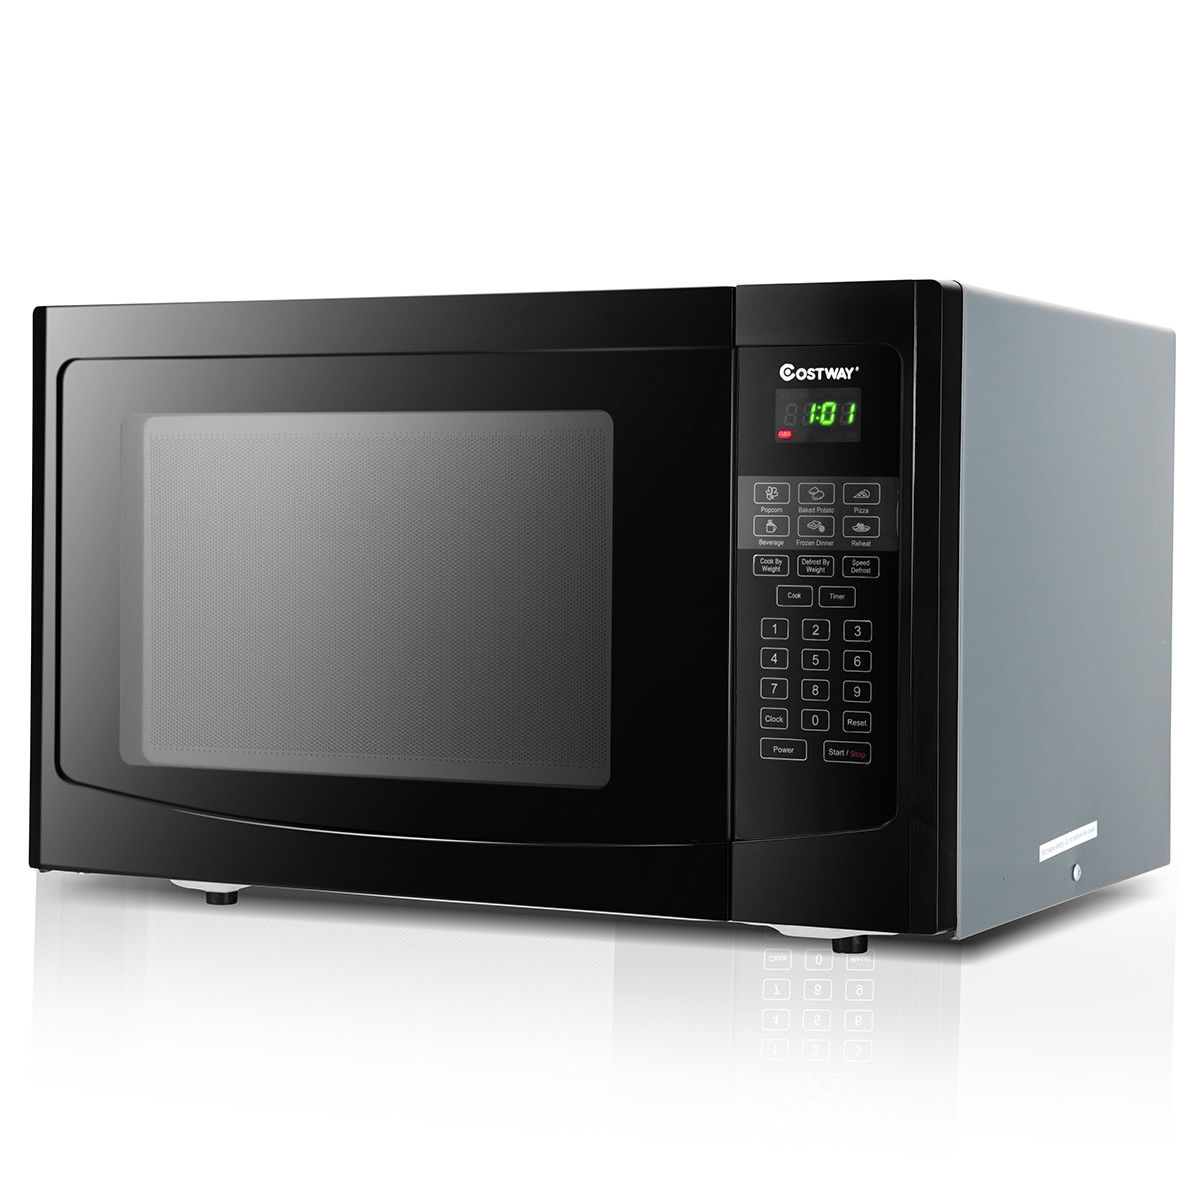 This is the microwave oven wgich can provide the benefit of convenient features you would find on a microwave without taking up too much counter space. Great for small kitchen, studios or dorm room. Sensor reheating lets you optimally cook six of the most popular food items with the touch of a button. Choose from ten power levels. The clear led display lets you know exactly how much time is left. The unit has a child clock function. Easily open the microwave with pressing the button. It is a great addition to any busy family's kitchen. Brand new and high quality. 6 Quick cook settings for popcorn, baked potato, pizza, frozen dinner, beverage or reheat. This is the microwave oven. Don't hesitate to buy it. Brand new and high quality 6 Quick cook settings for popcorn, baked potato, pizza, frozen dinner, beverage or reheat 1000 watts with 10 power settings and kitchen timer Weight and time defrost Easy clean interior and LED lighti